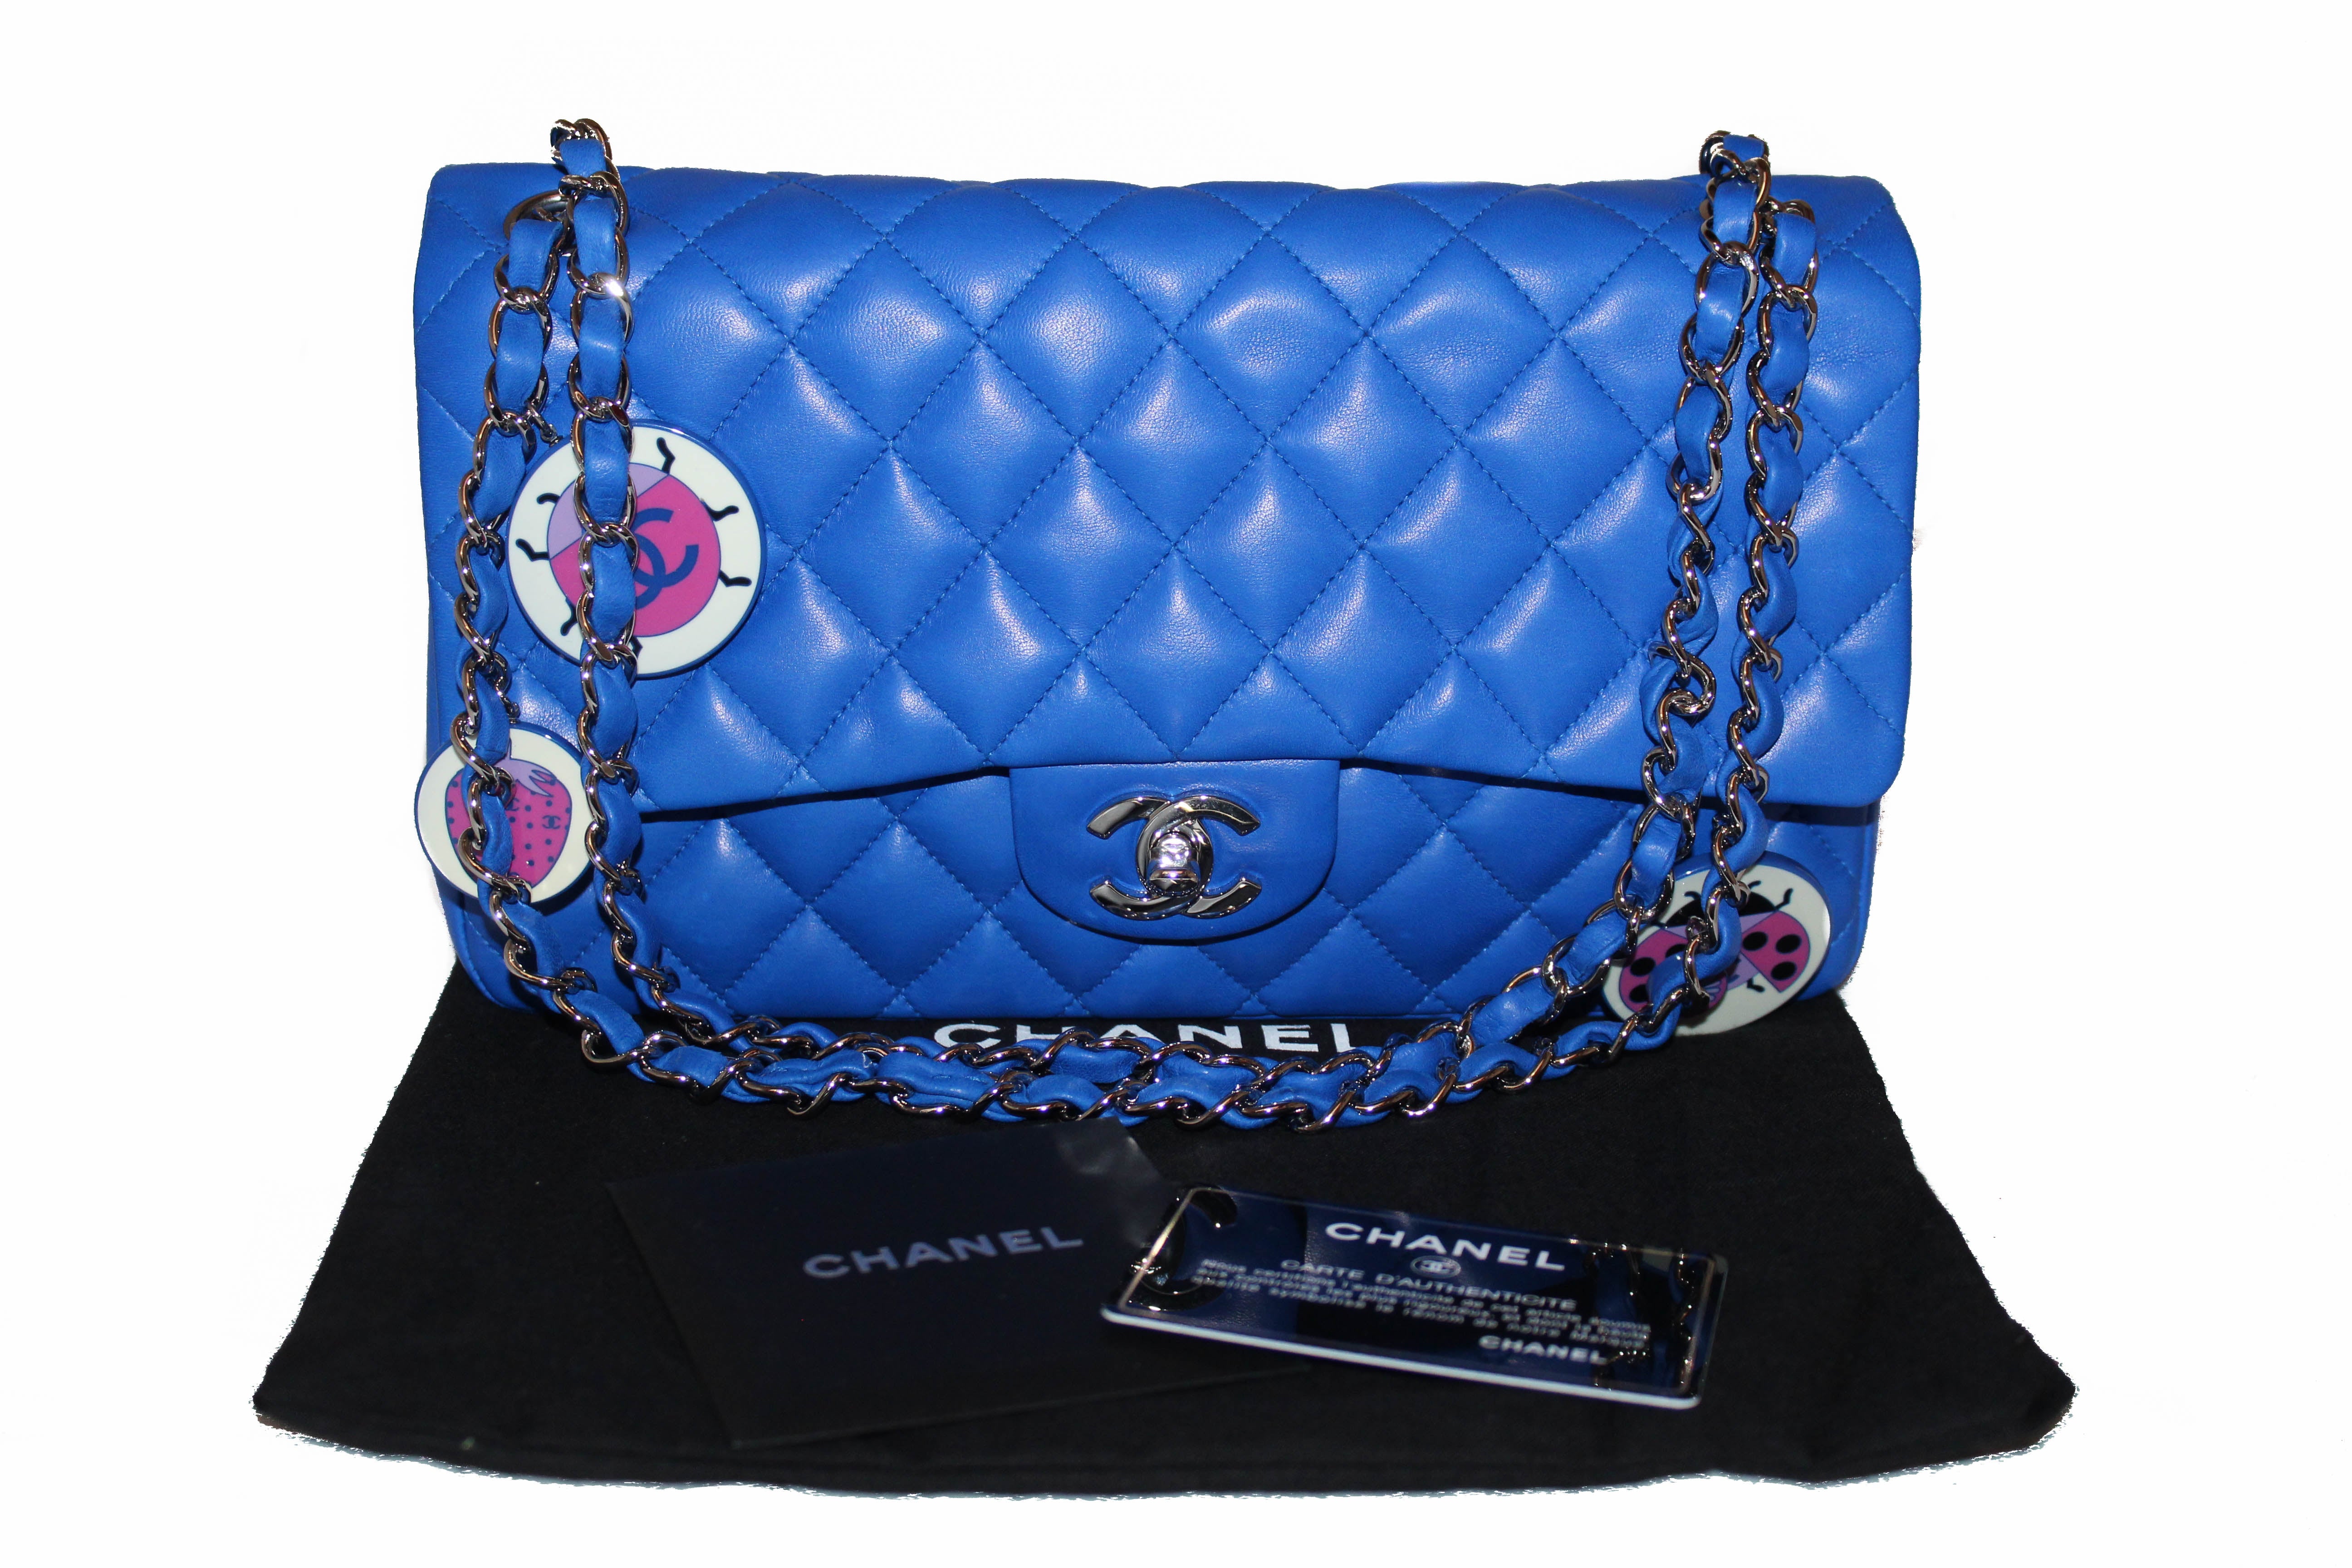 Authentic New Chanel Electric Blue Lambskin Quilted Leather Charrm Medium  Classic Shoulder Bag